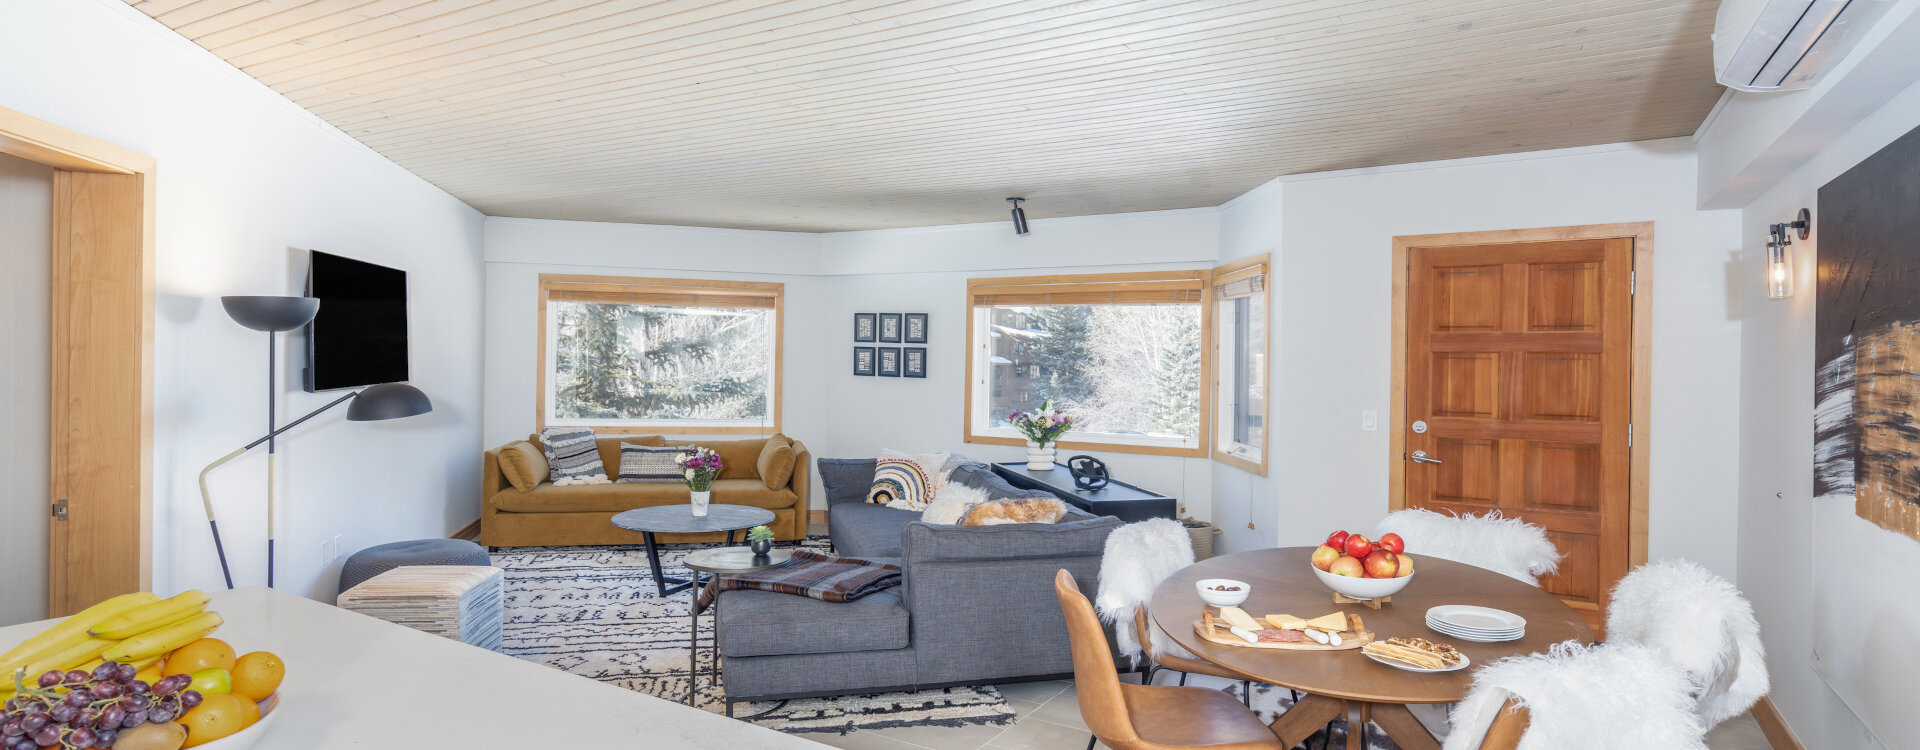 1.01-Telluride-Vacation-Rental-Ice-House-305-Living-Areas